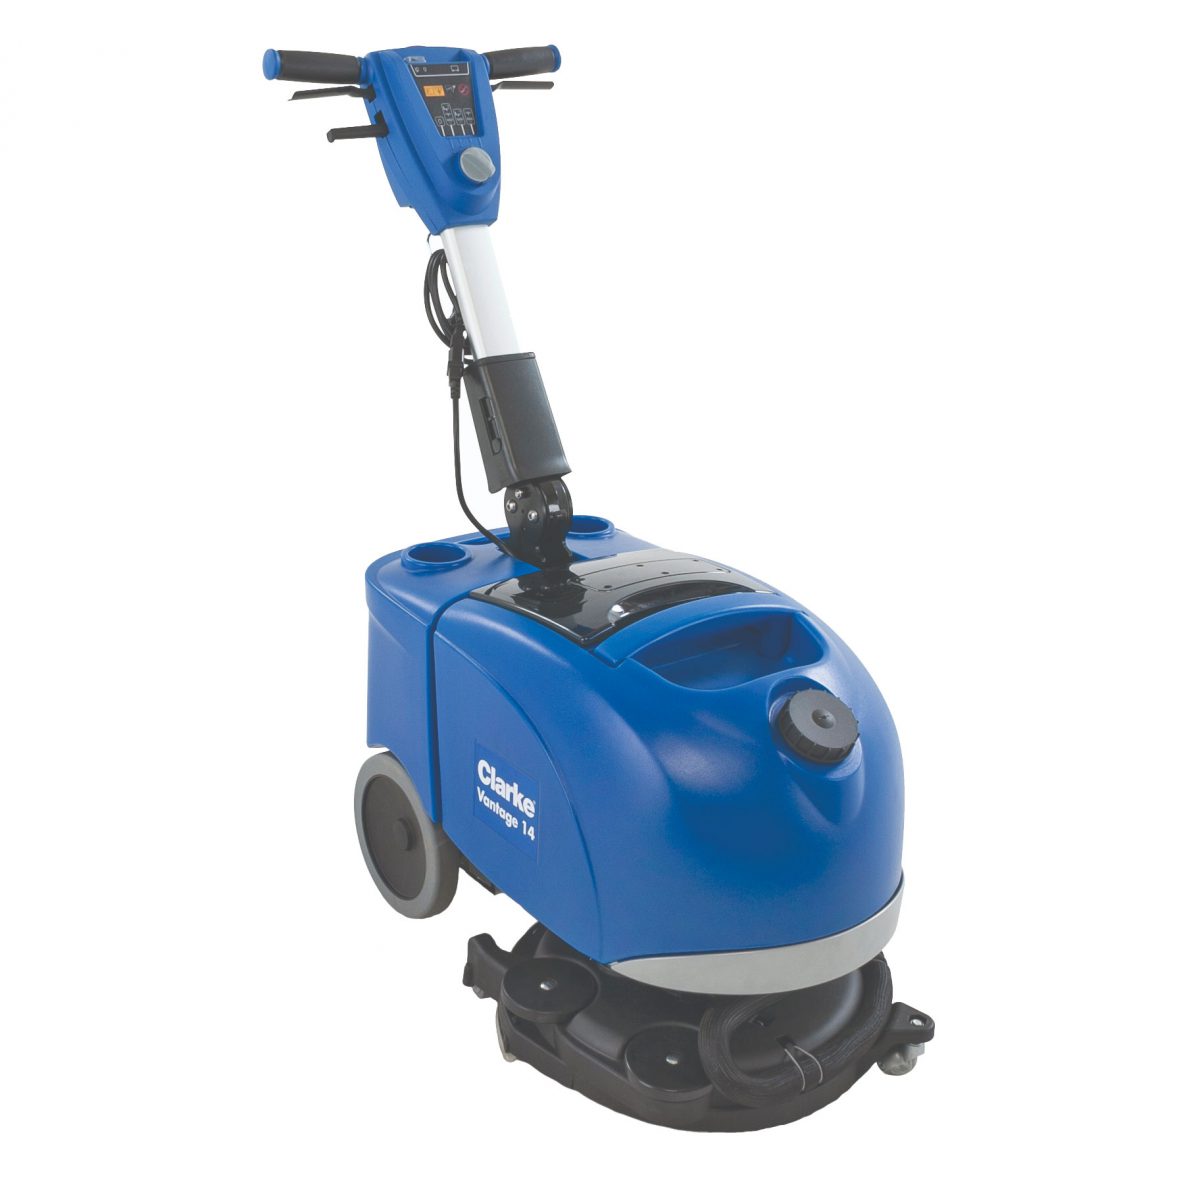 Clarke Vantage 14 Battery Operated Microscrubber